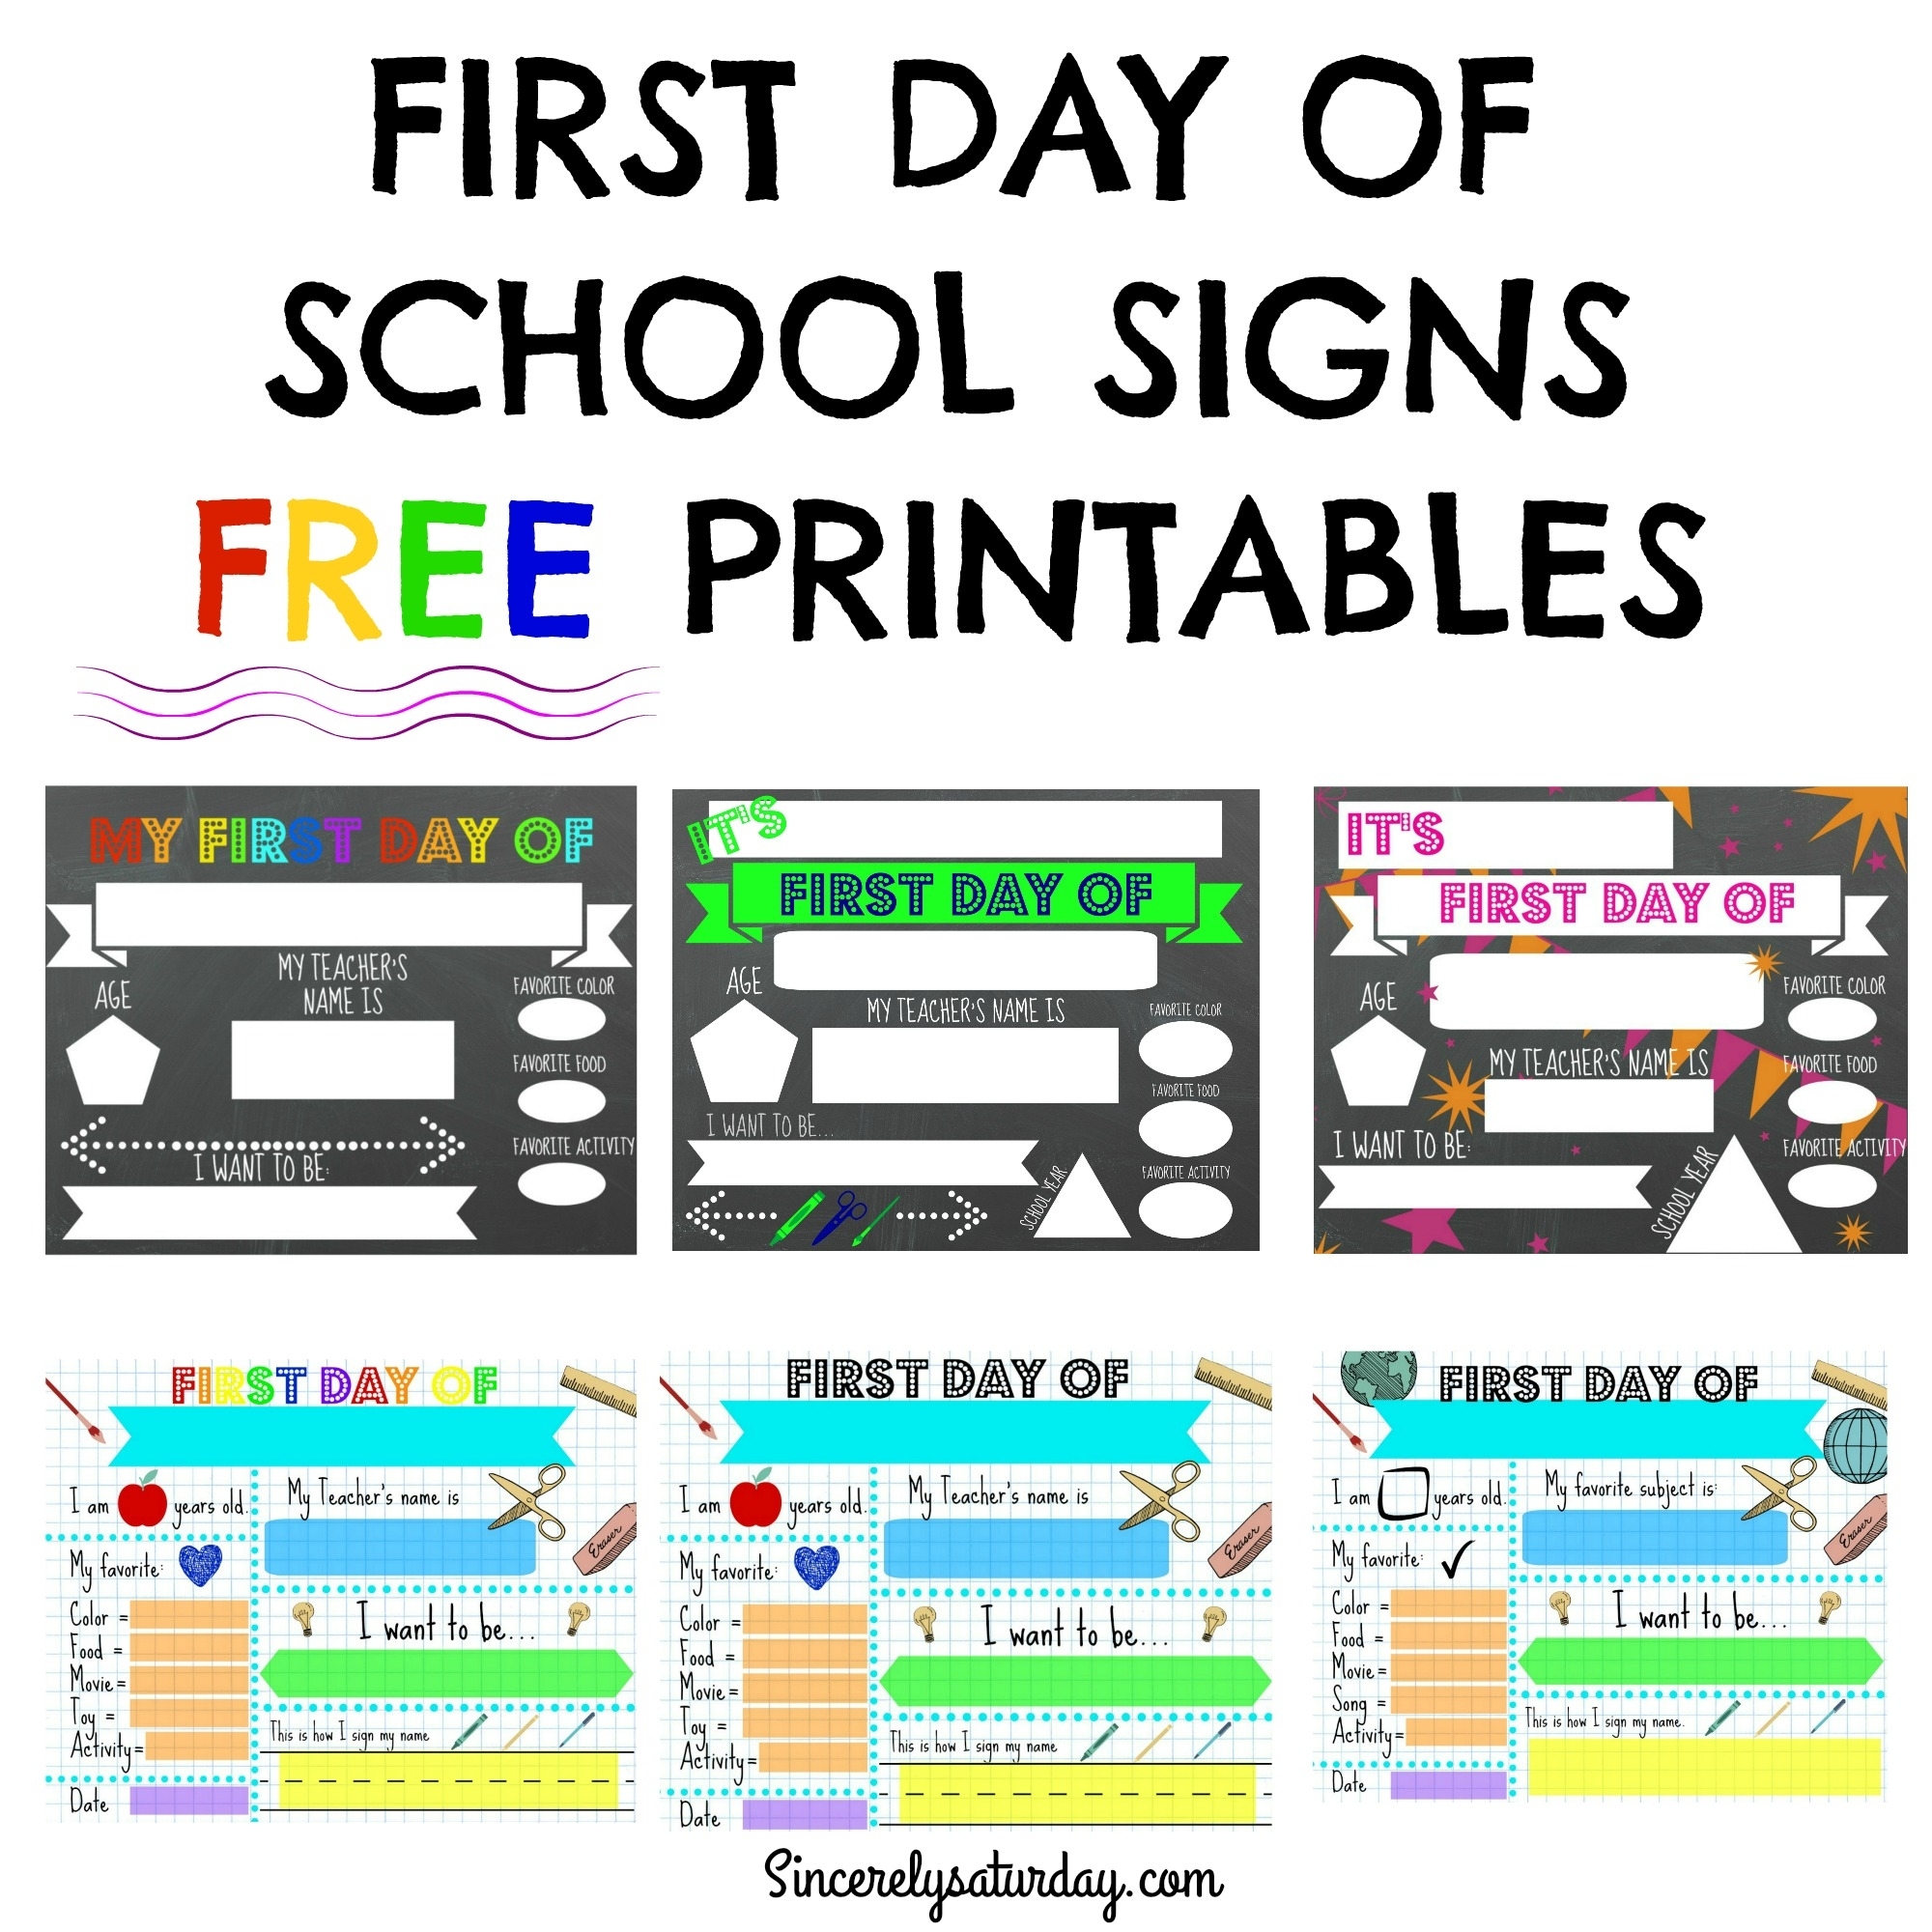 FREE PRINTABLE FIRST DAY OF SCHOOL SIGNS Sincerely Saturday